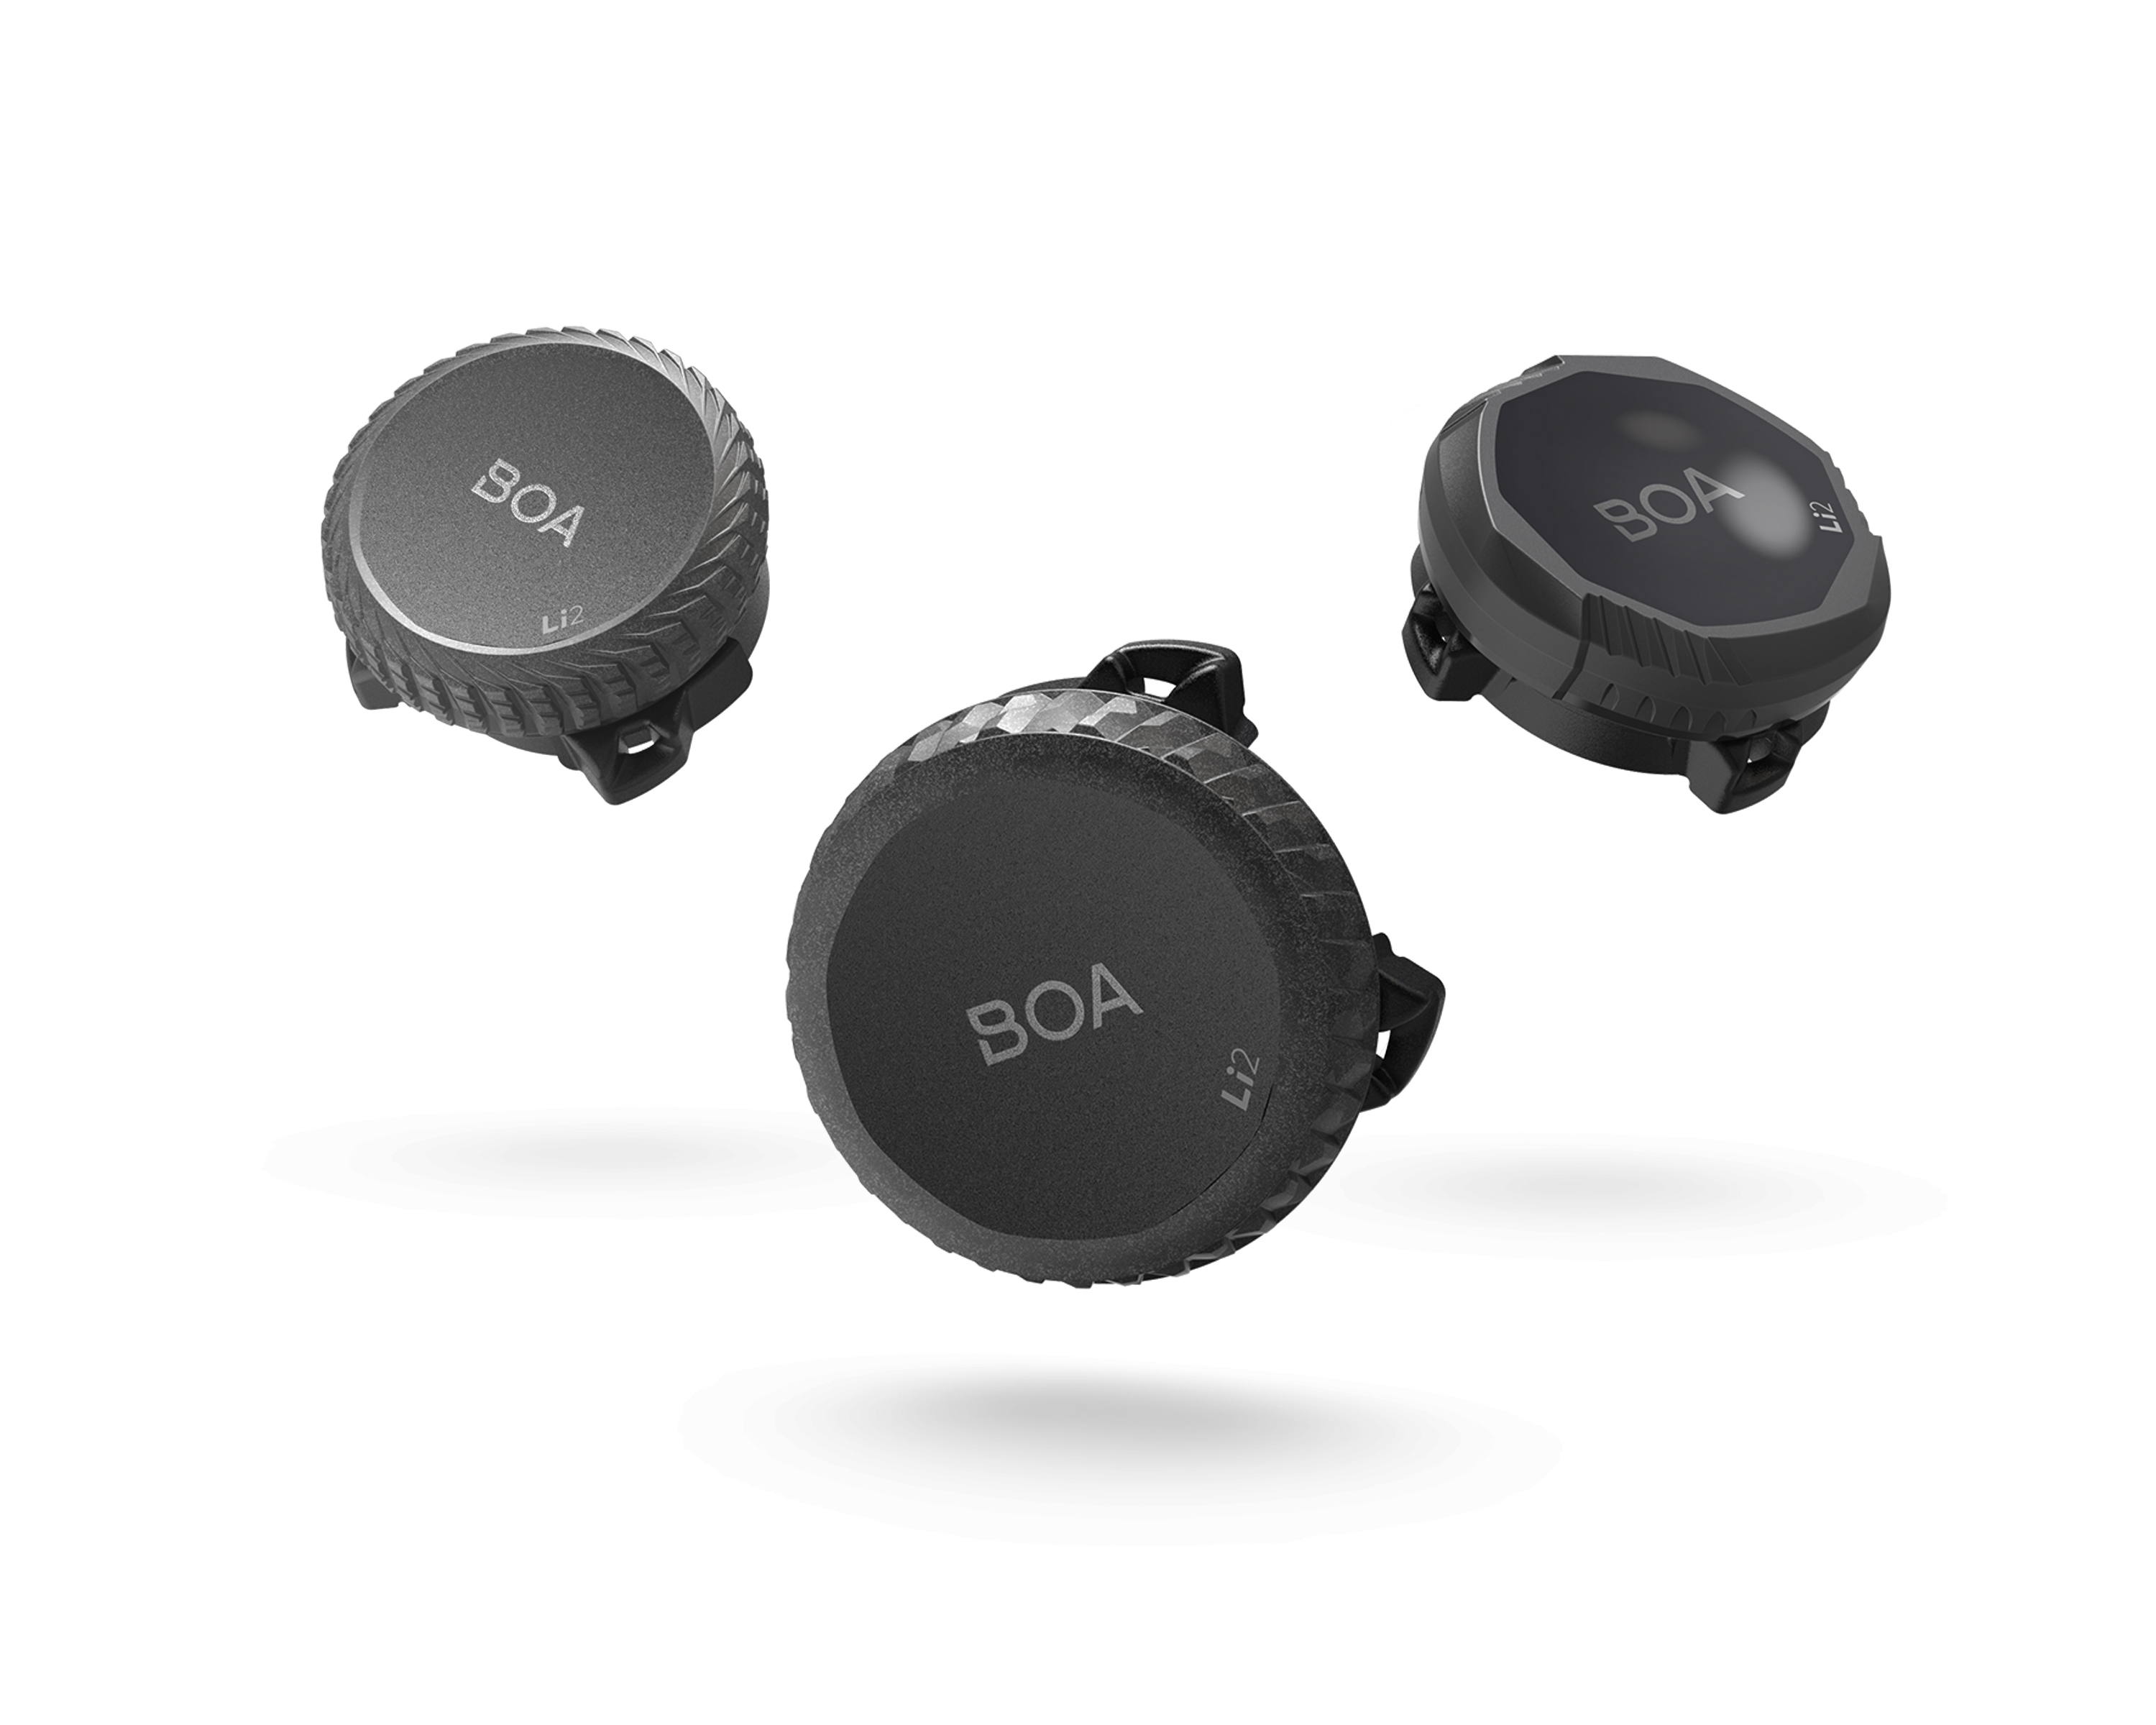 BOA launches new dial platform, to 